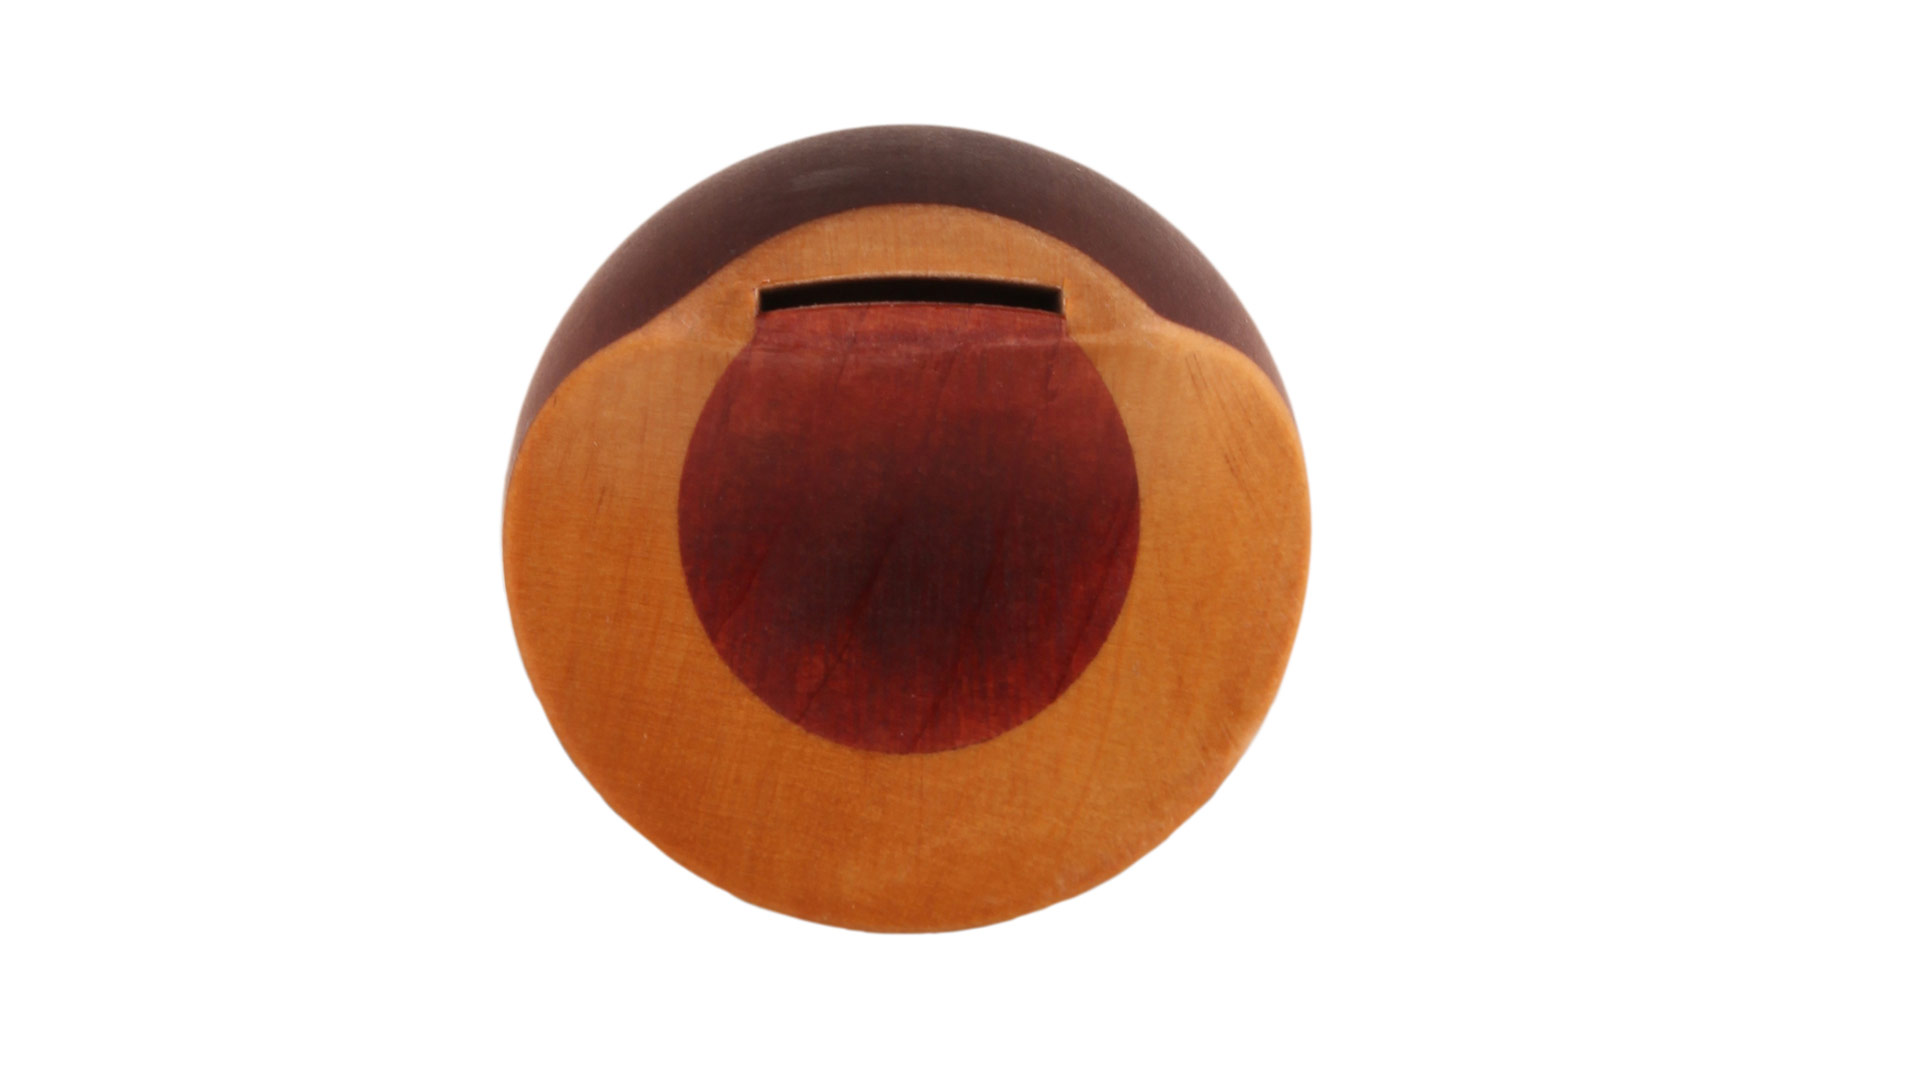 Bressan by Blezinger, alto in f', baroque double hole, 442 Hz, Brazilian boxwood, stained